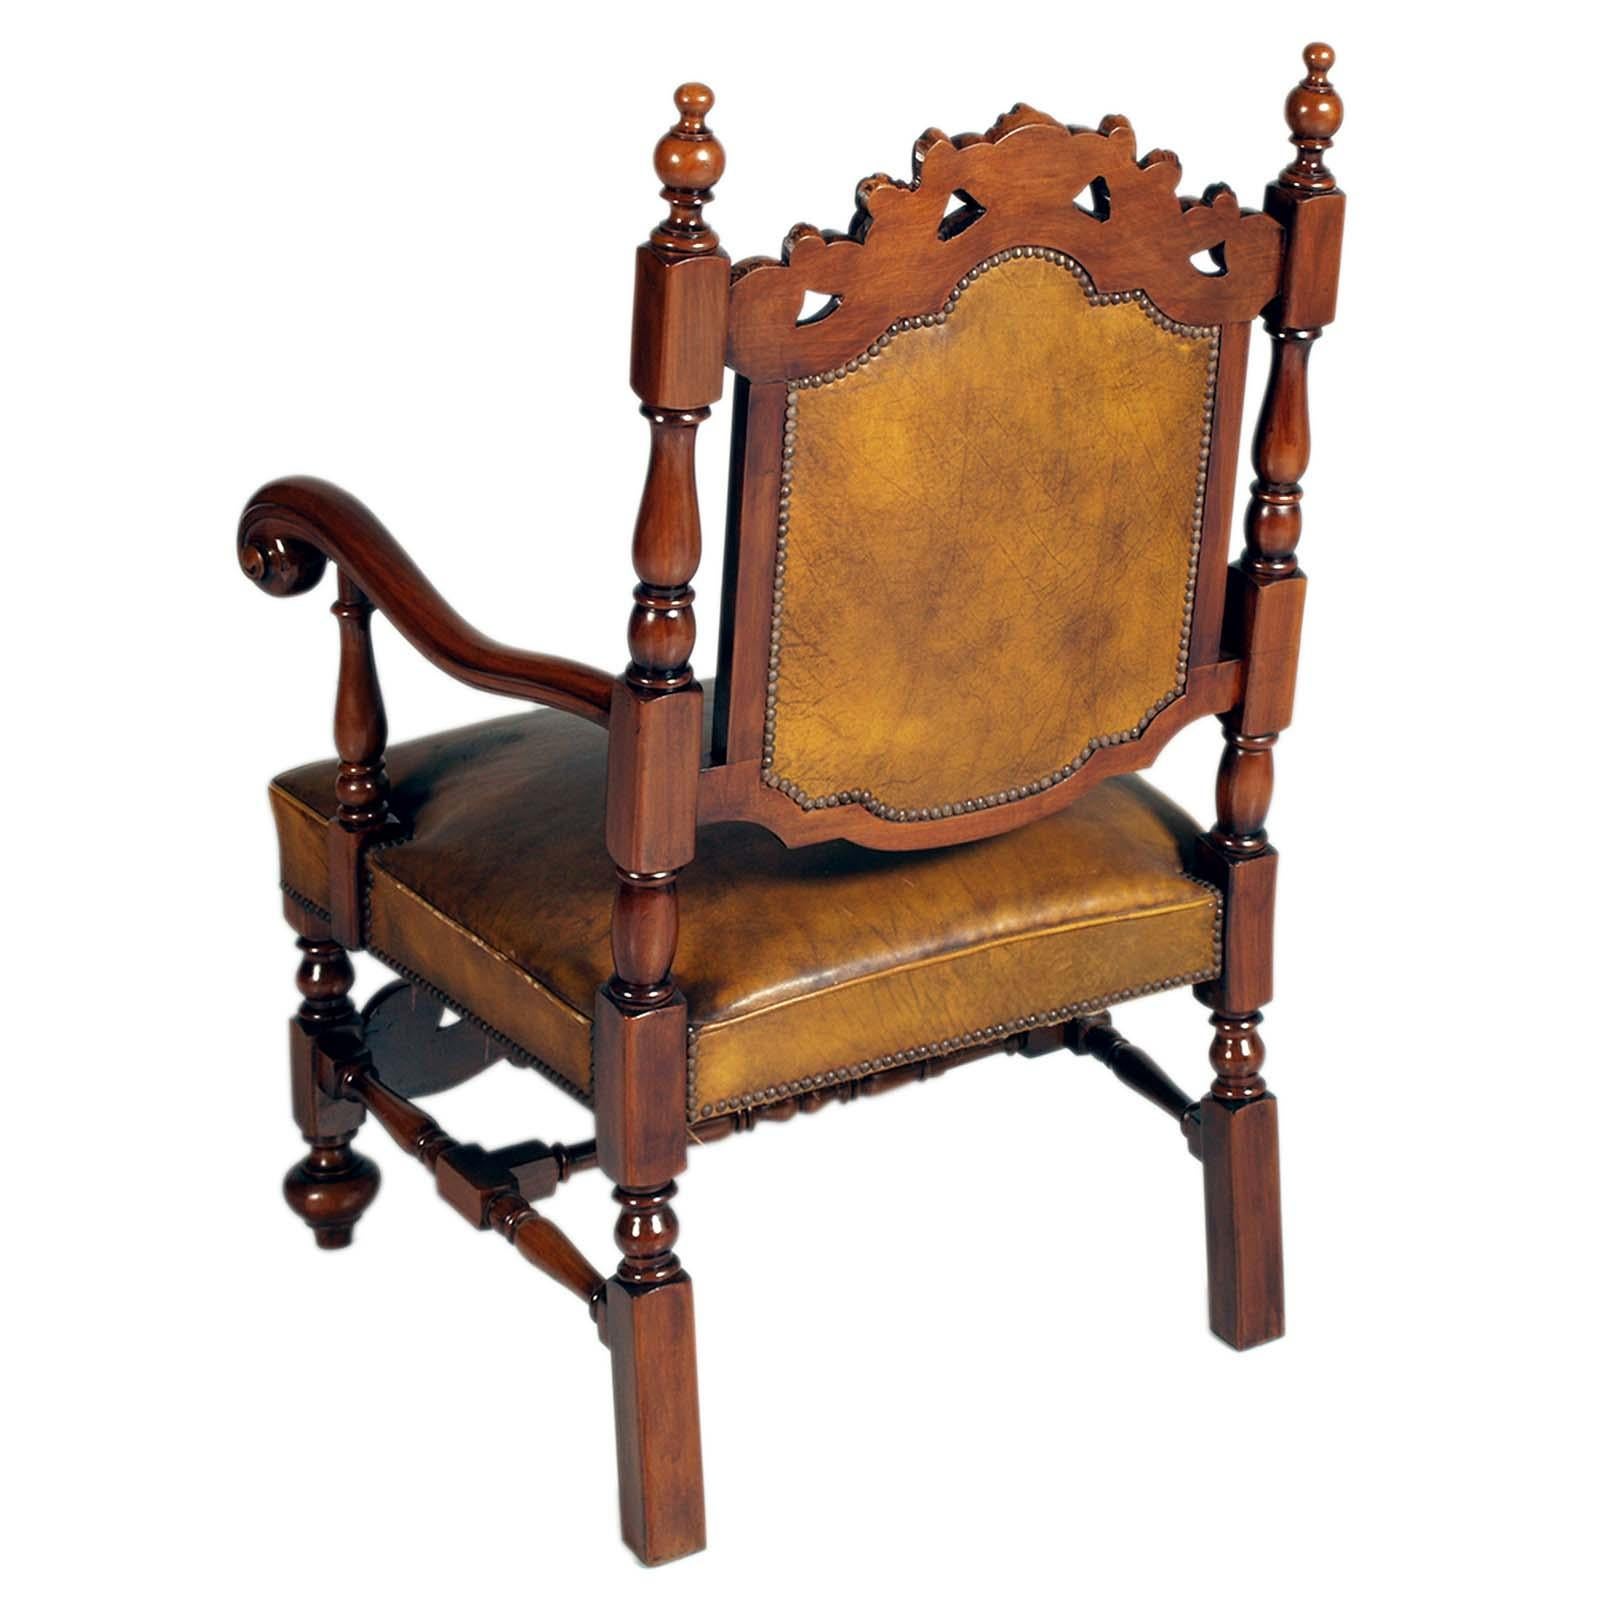 Renaissance Revival Venice 19th Century Throne Chair attributed Testolini Frères Leather Upholster For Sale